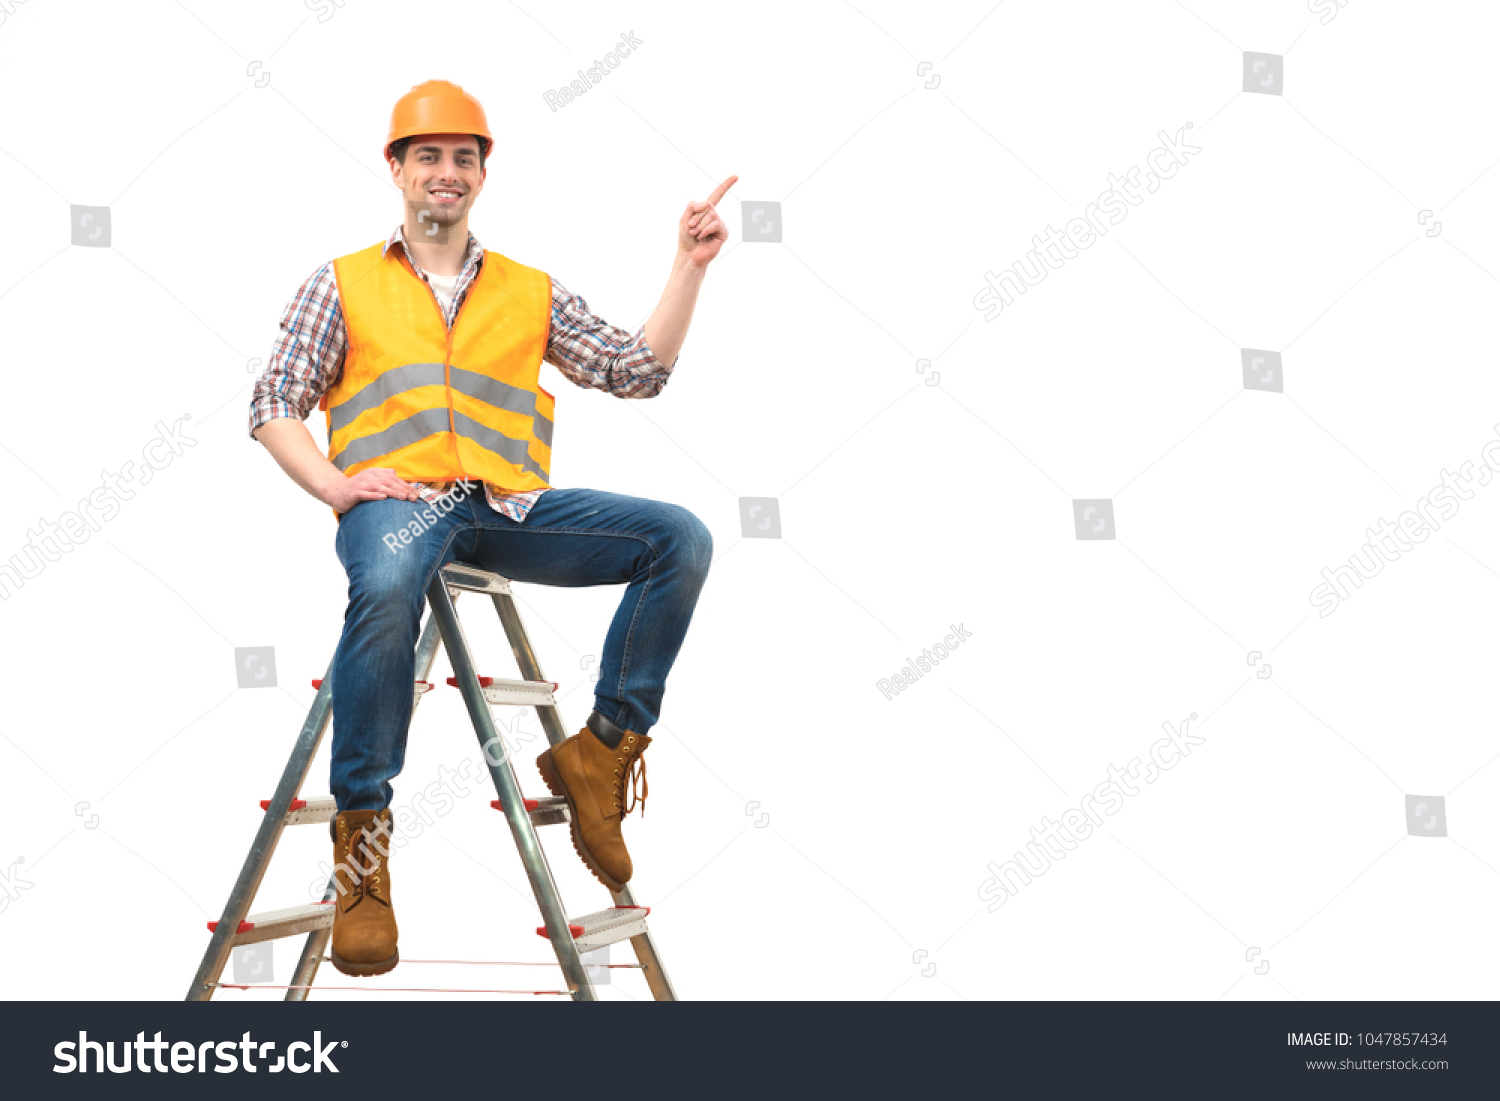 The happy builder on the ladder gesturing on the white background #1047857434